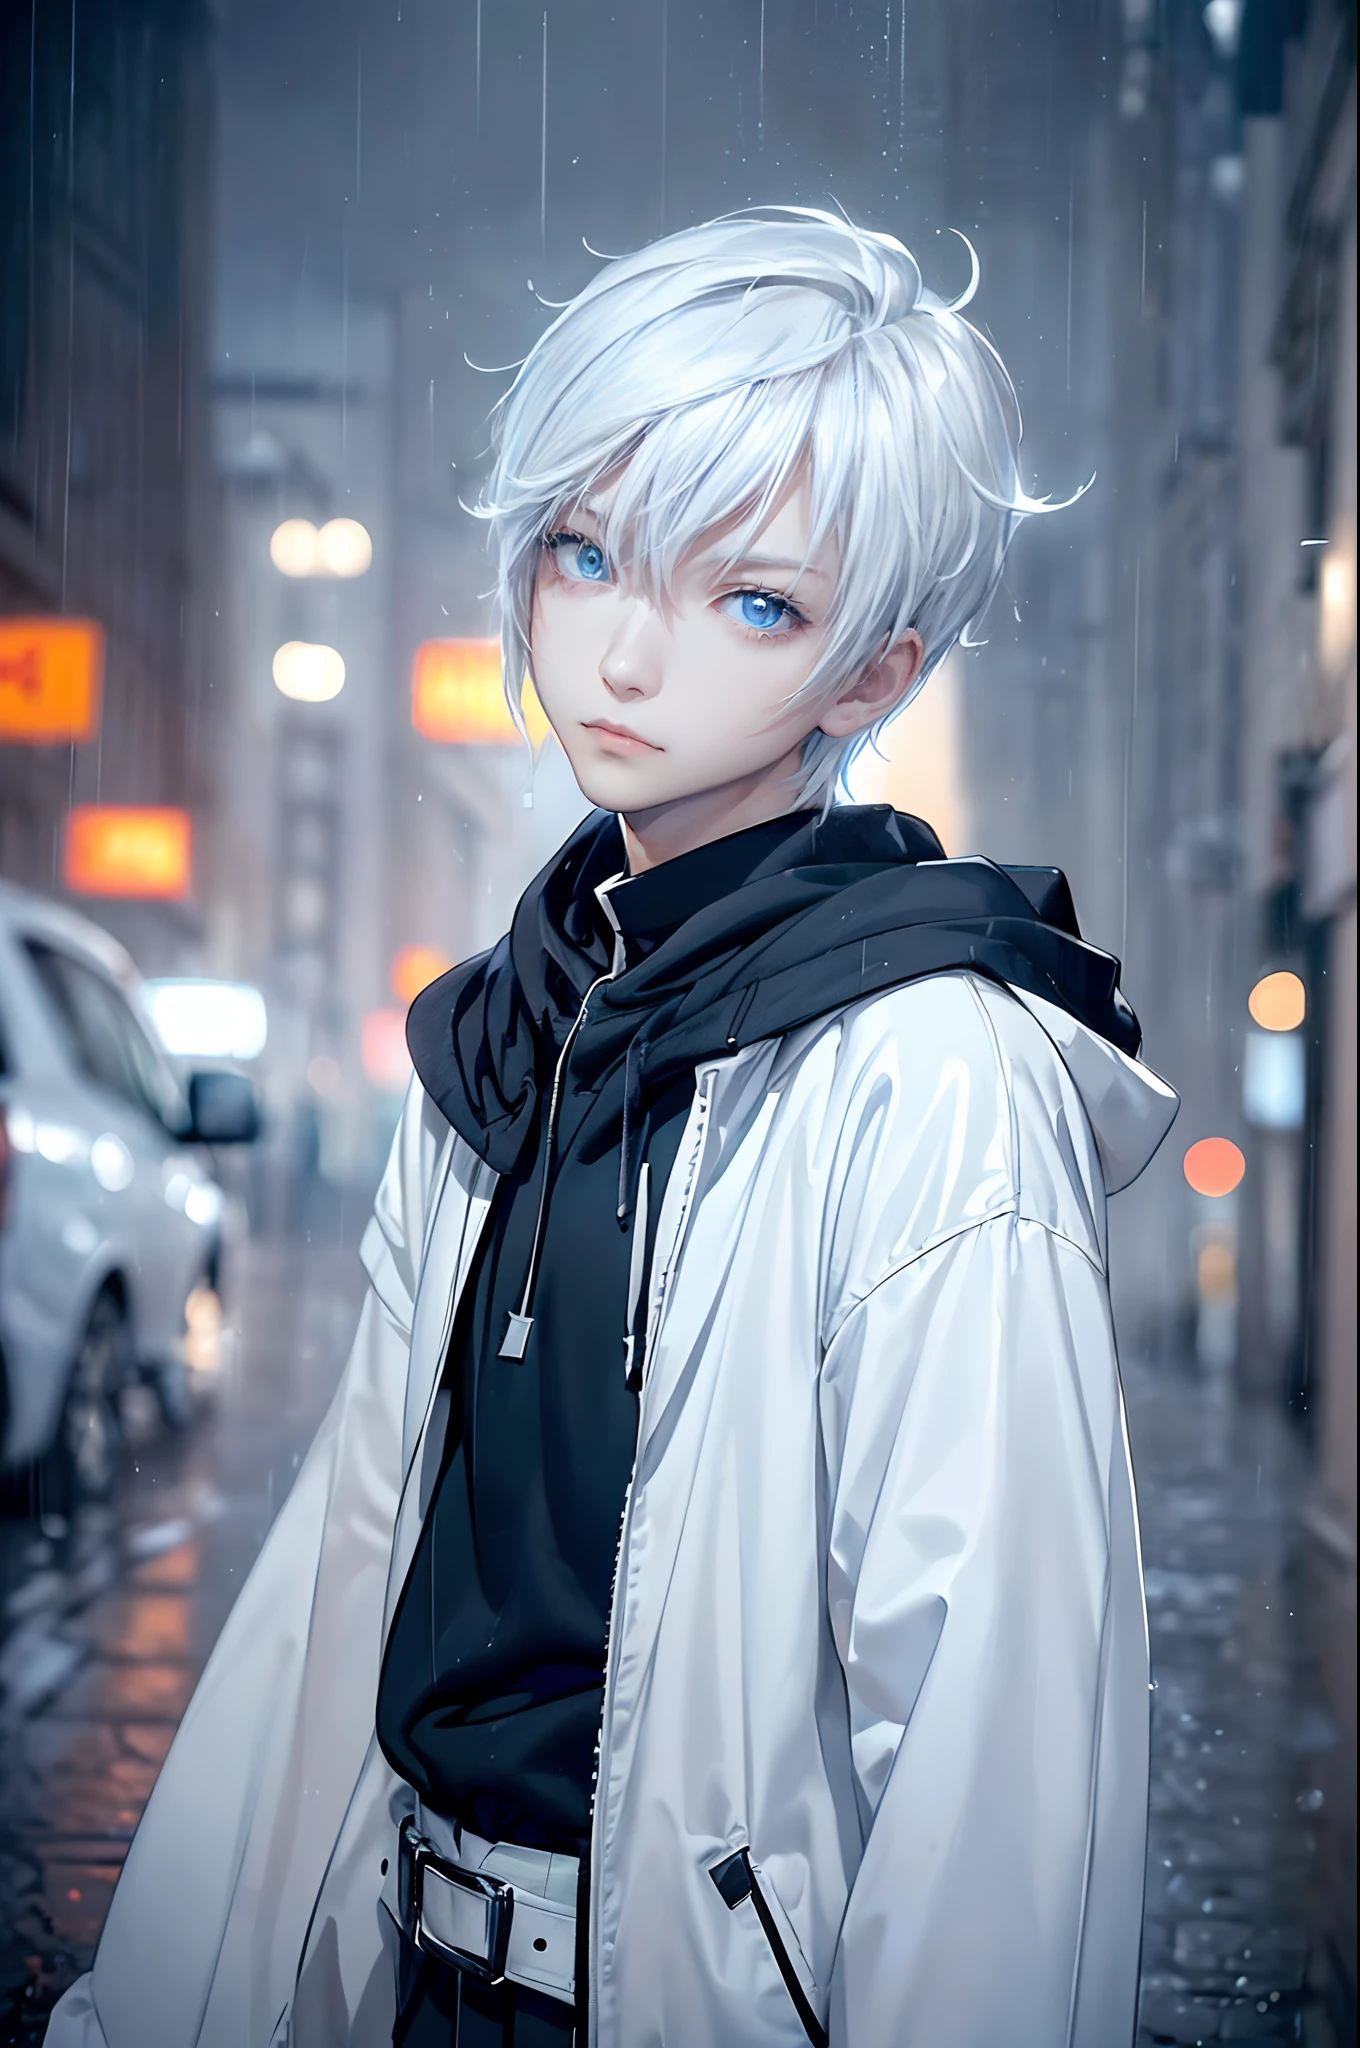 ((4K works))、​masterpiece、(top-quality)、One beautiful boy、Slim body、tall、((Black Y-shirt and white pants、Charming street style))、Please wear one jacket、Wearing a hood to hide his face、(Detailed beautiful eyes)、Morning City、((Rainy city))、Fashionable city with morning rain、During the walk、((Bright, Cloudy sky))、((Face similar to Carly Rae Jepsen))、((Short-haired white hair))、((Smaller face))、((Neutral face))、((Bright blue eyes))、((American adult male))、((Adult male 26 years old))、((Cool Men))、((Like a celebrity))、((Lonely look))、((Korean Makeup))、((elongated and sharp eyes))、((Happy dating))、((boyish))、((Upper body photography))、Professional Photos、((Model photo))、((Shot alone))、((He's under the roof))、((Looking up at the sky))、((photographed from the back))、((He is looking upwards))、((His eyes are looking upwards))、((Increase the angle of the face))、((He is walking in front of the viewer))